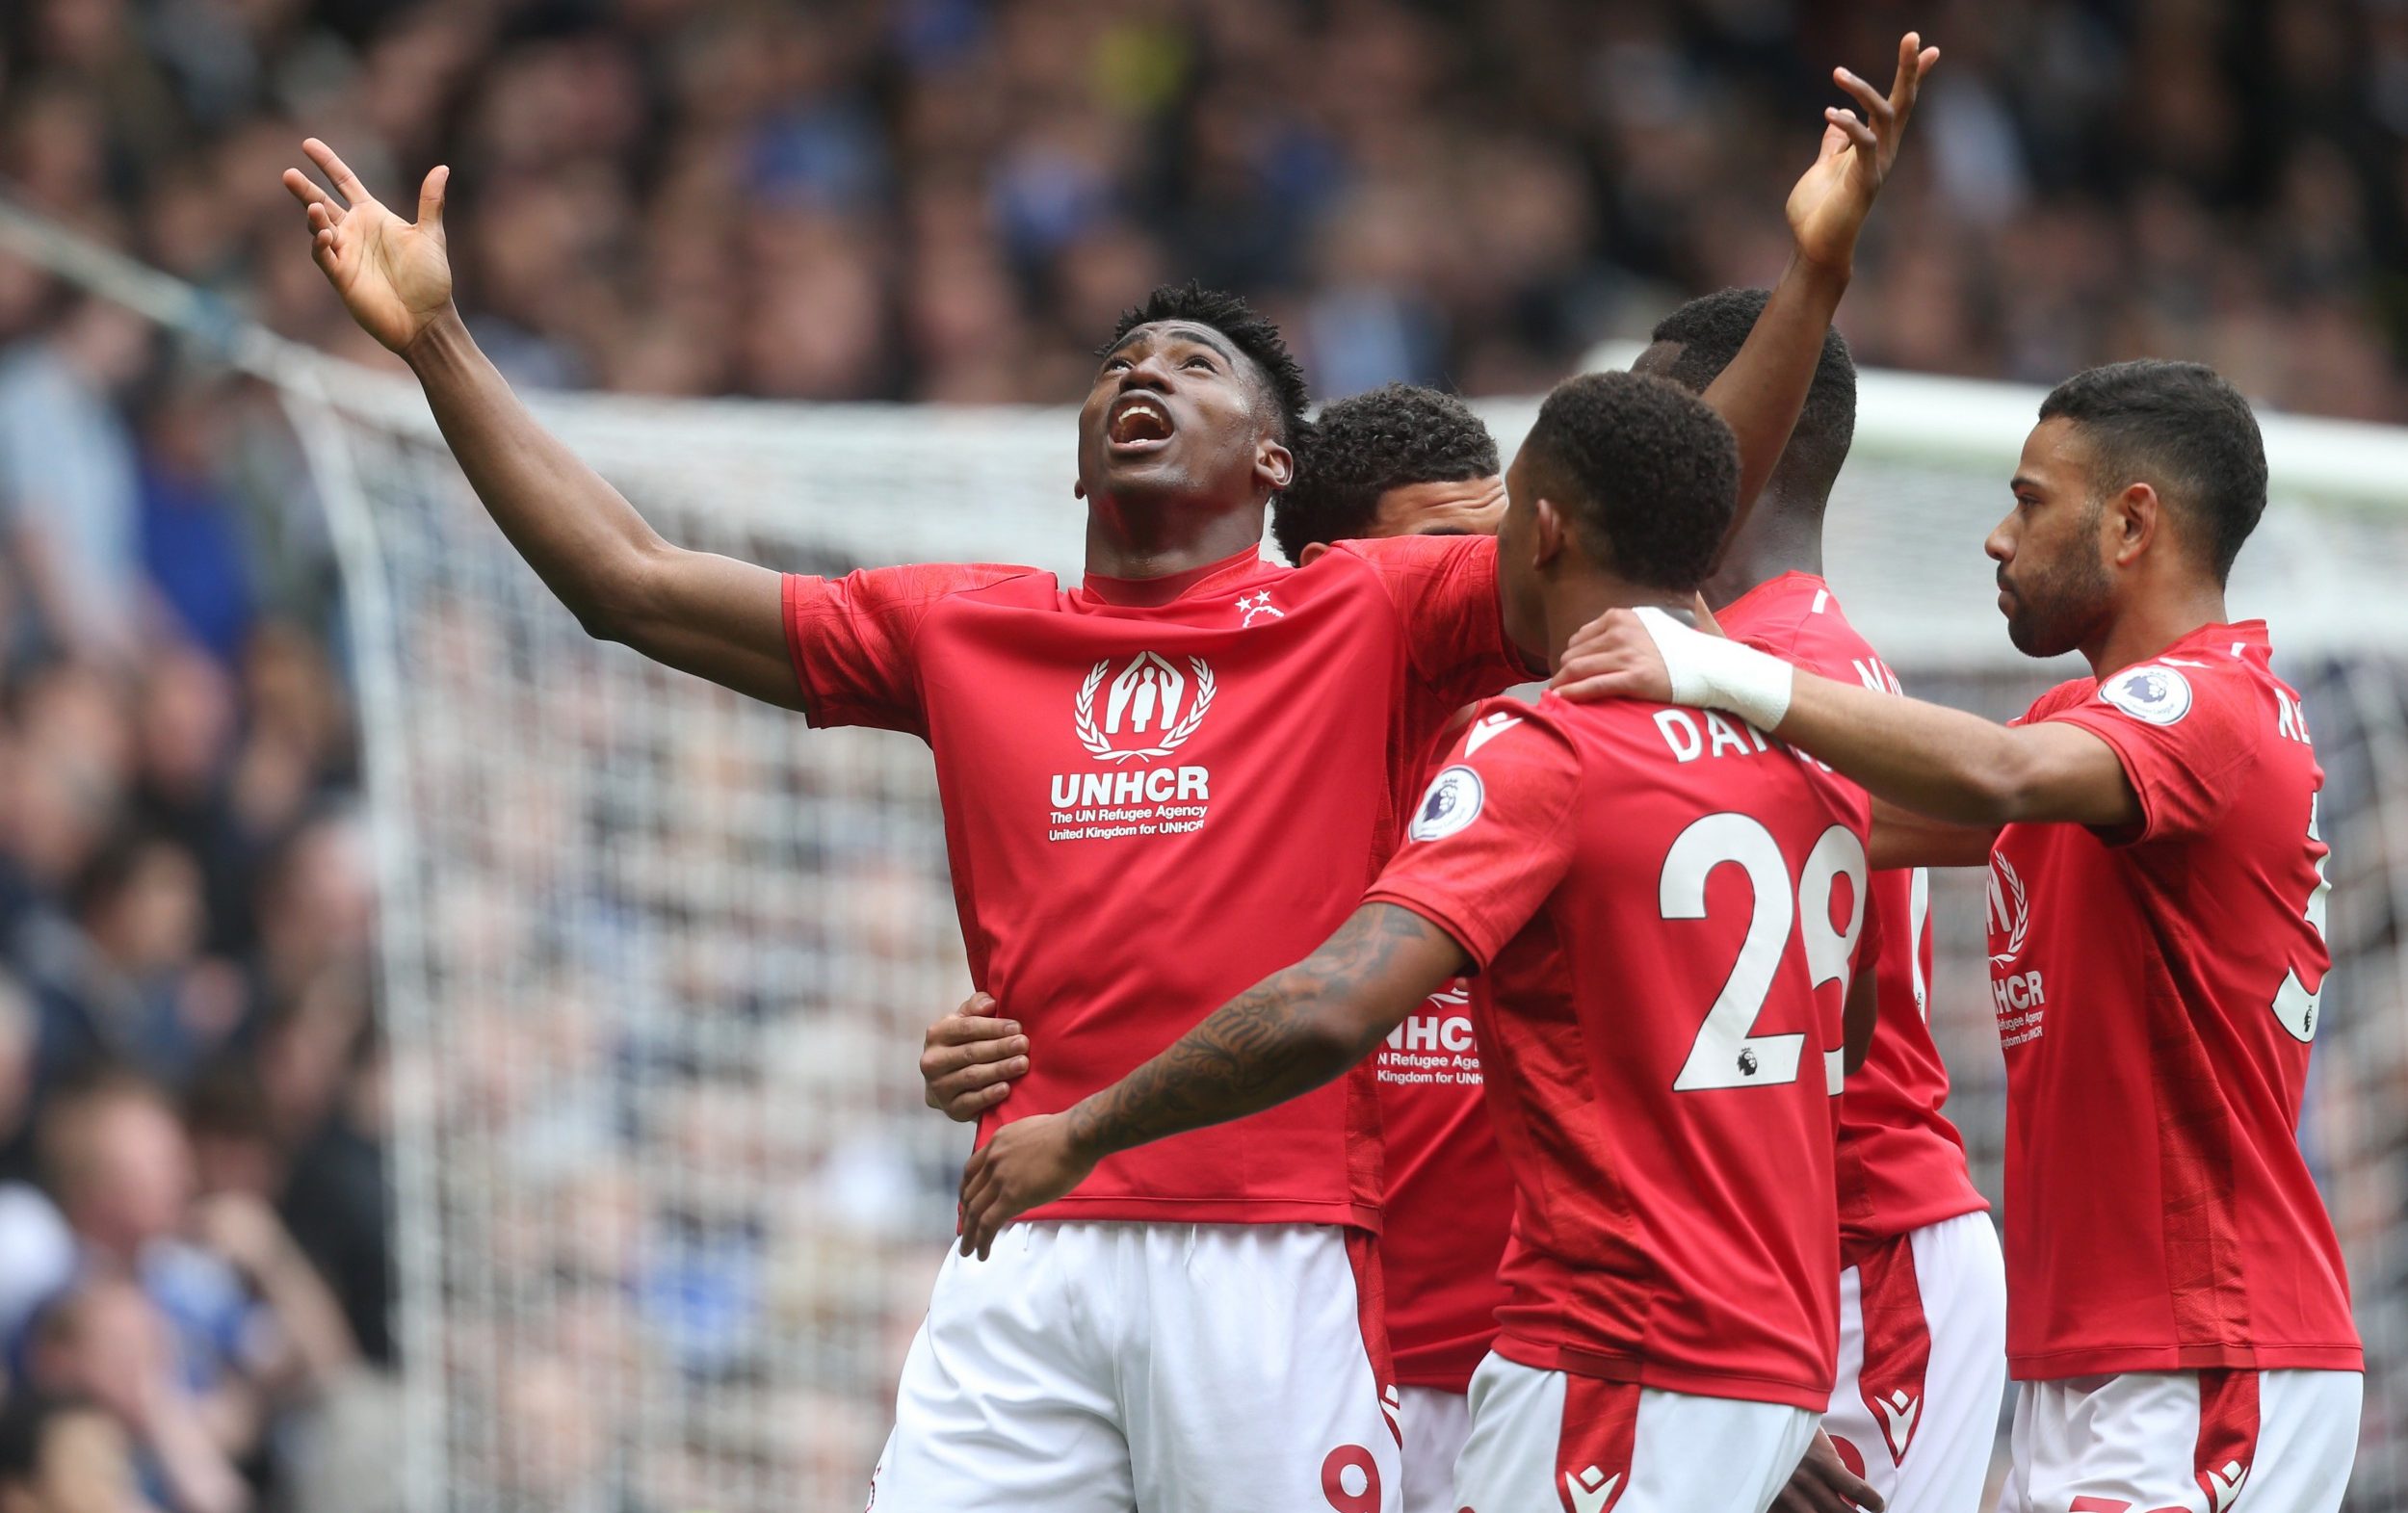 taiwo awoniyi set to hand nottingham forest major fitness boost in relegation fight